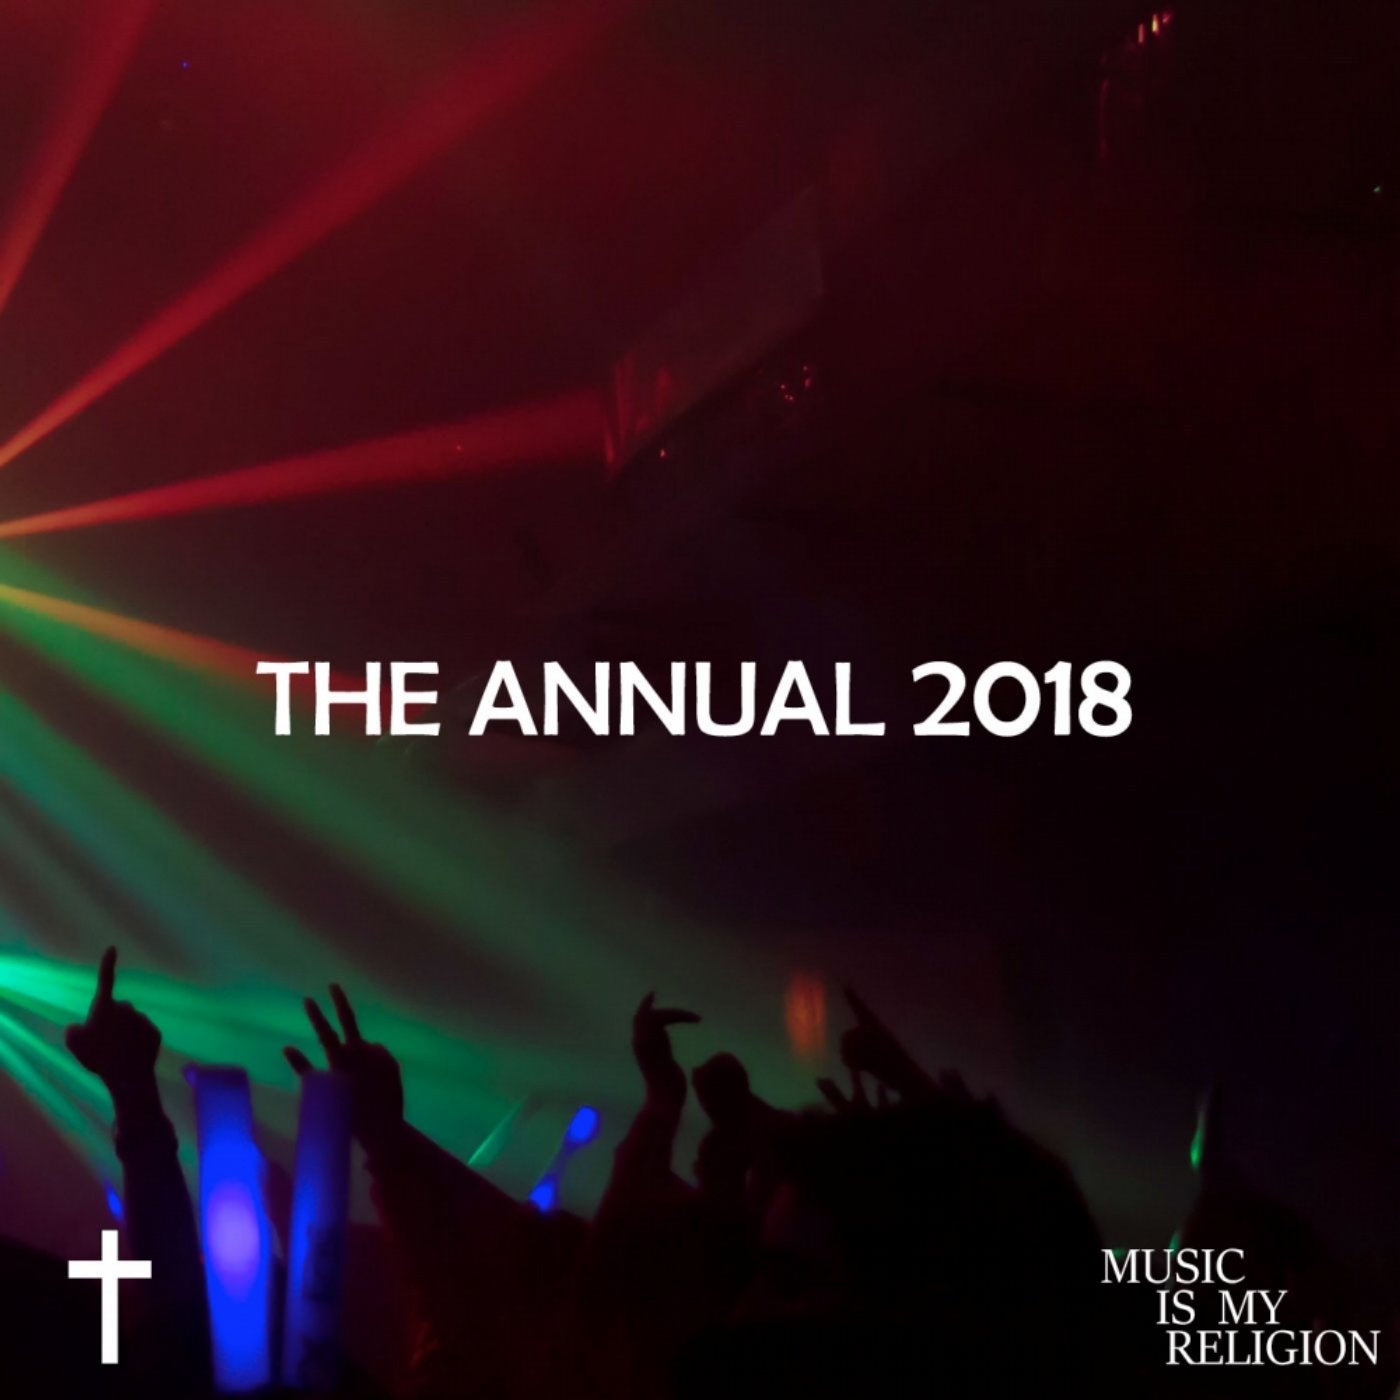 The Annual 2018